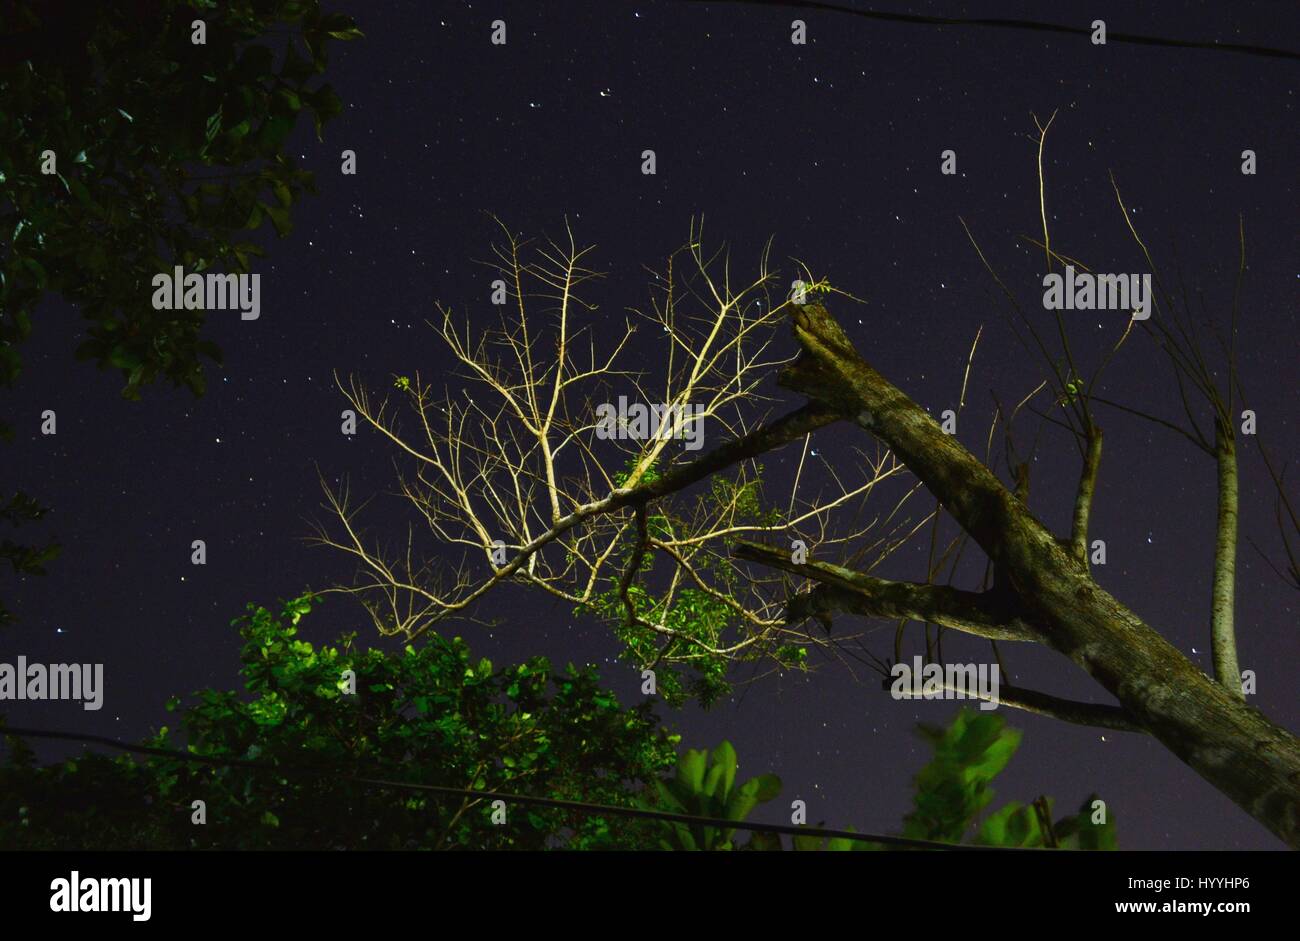 Tree trunk and branches against a starry night sky background captured using 30 second long exposure shot. Stock Photo